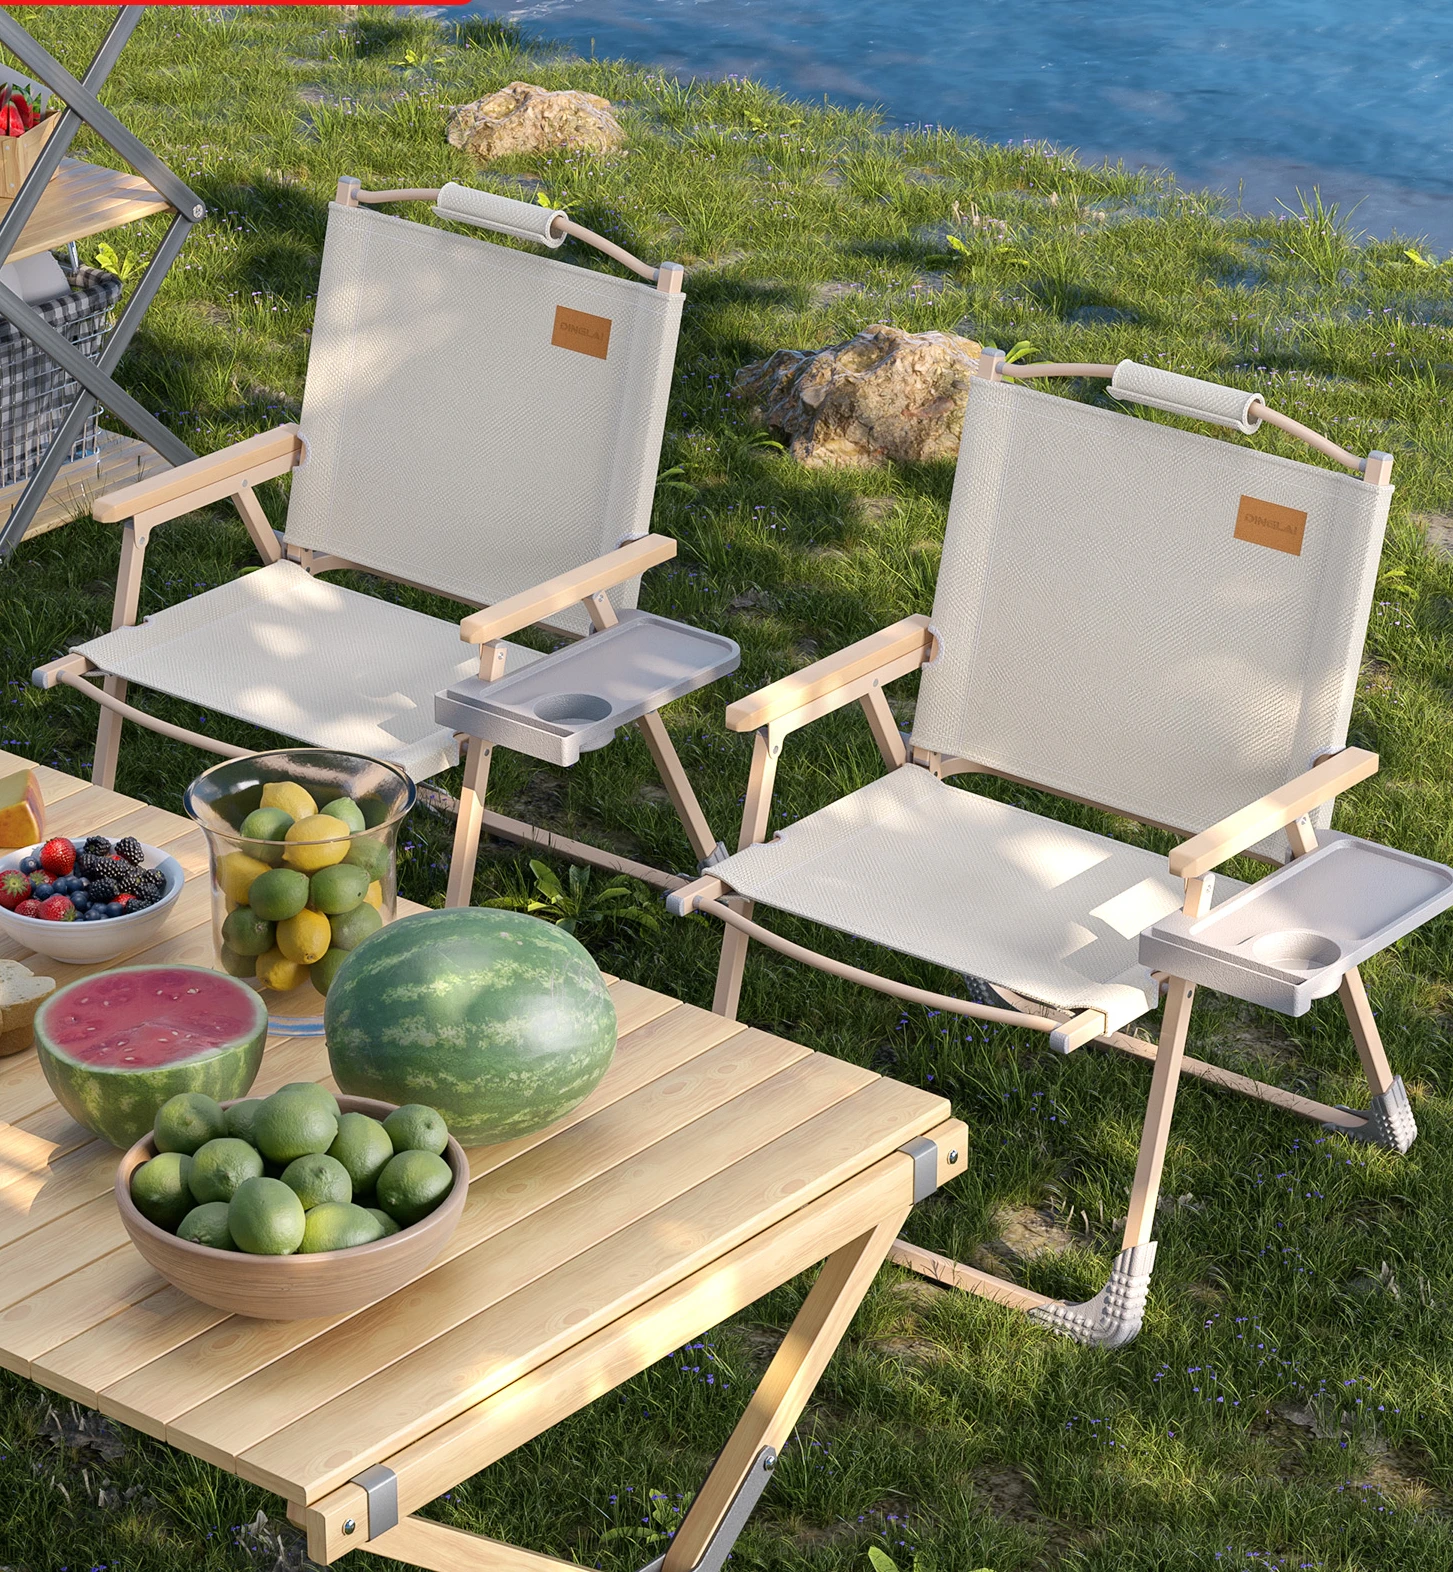 

Outdoor tables, chairs, camping backrests, folding chairs, beach chairs, portable lunch loungers